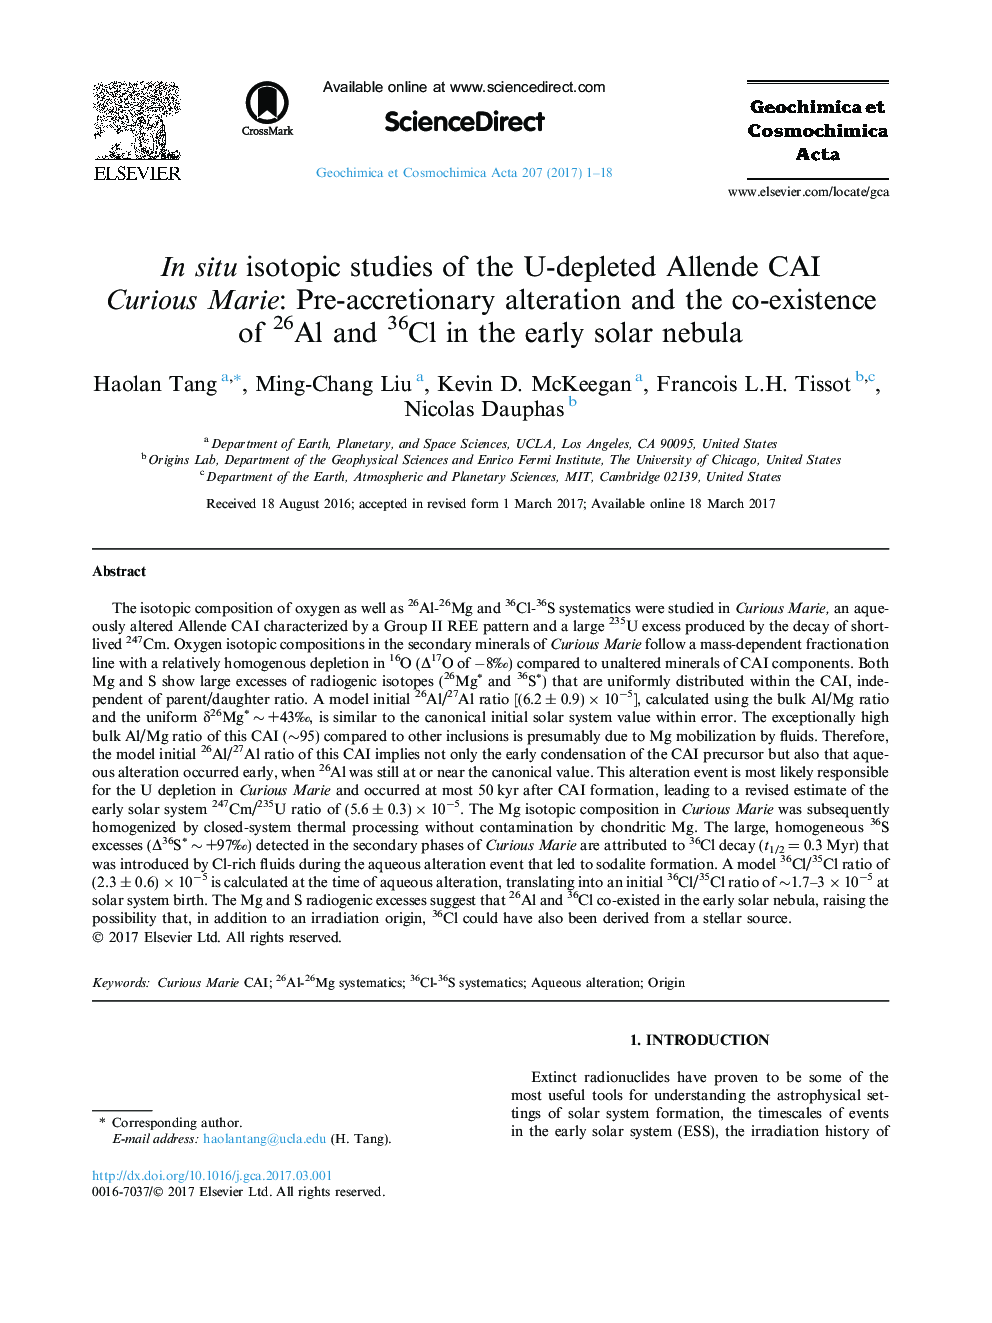 In situ isotopic studies of the U-depleted Allende CAI Curious Marie: Pre-accretionary alteration and the co-existence of 26Al and 36Cl in the early solar nebula